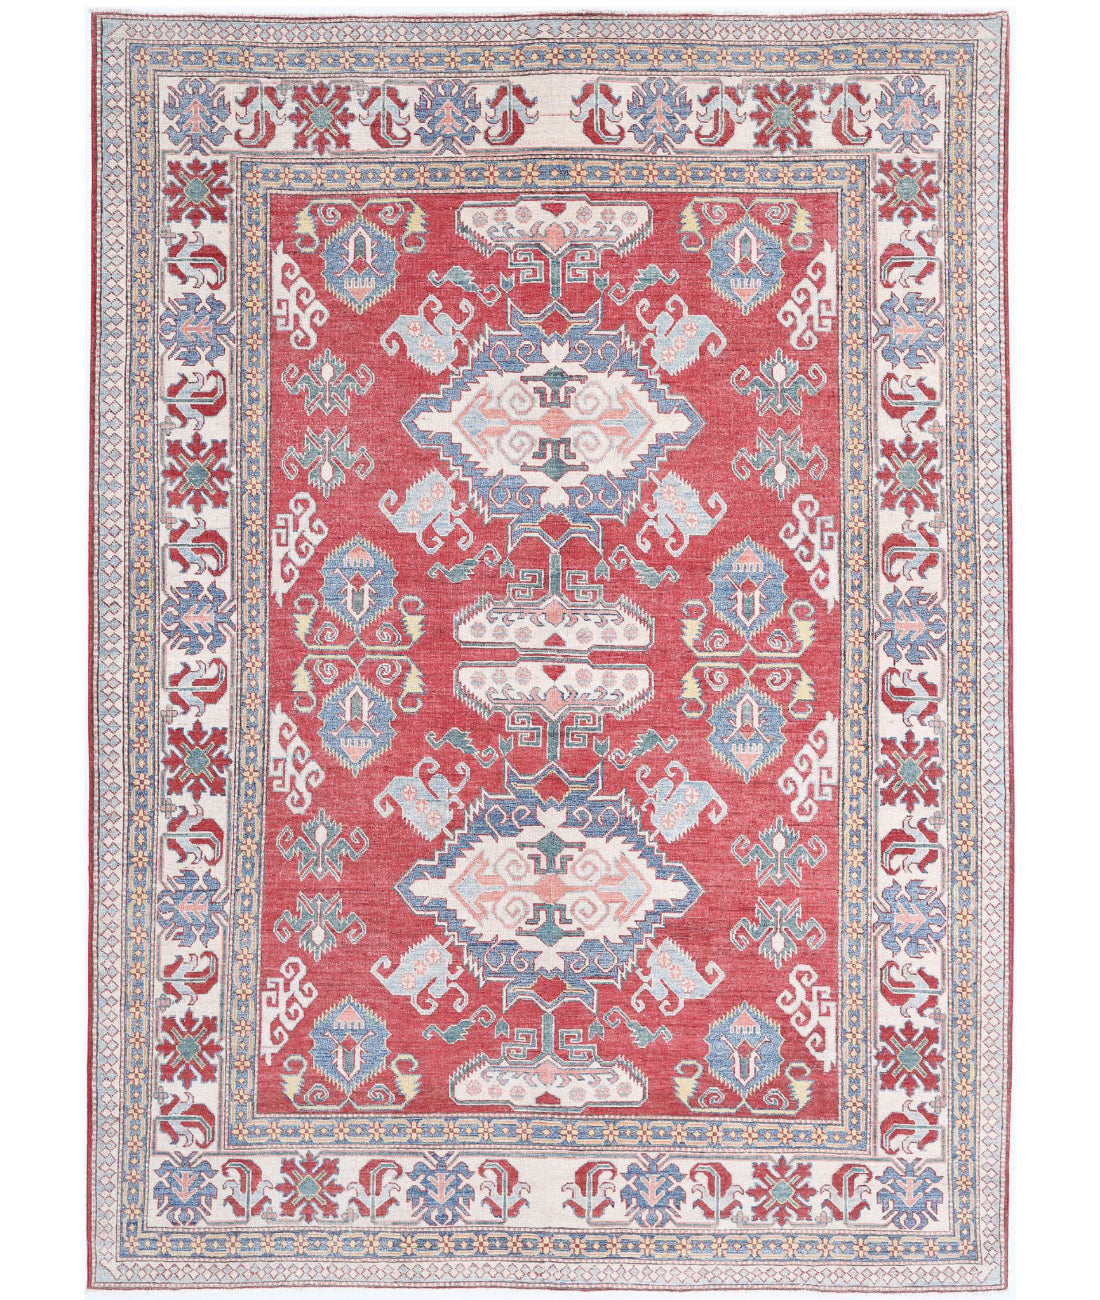 Hand Knotted Tribal Kazak Wool Rug - 7'8'' x 10'8'' 7'8'' x 10'8'' (230 X 320) / Red / Ivory